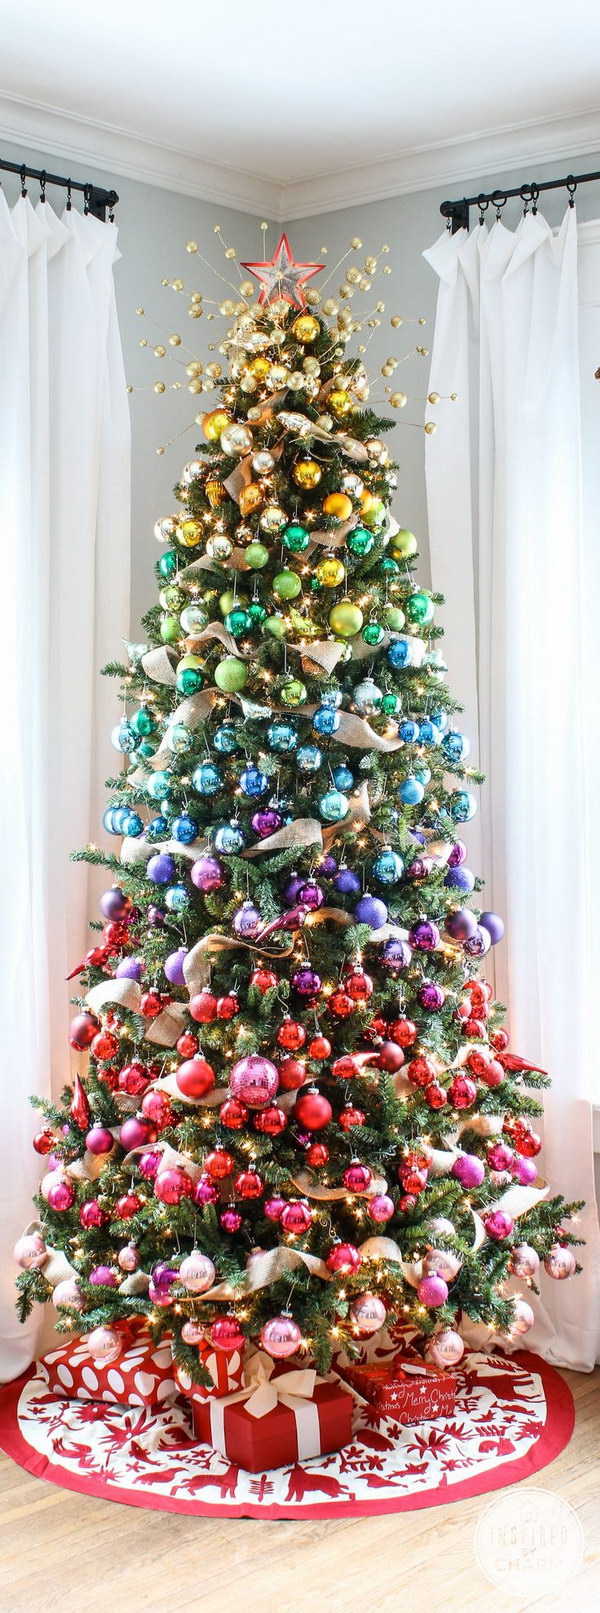 Rainbow Christmas Tree. This is a bright idea when you don't want a traditional Christmas tree. 